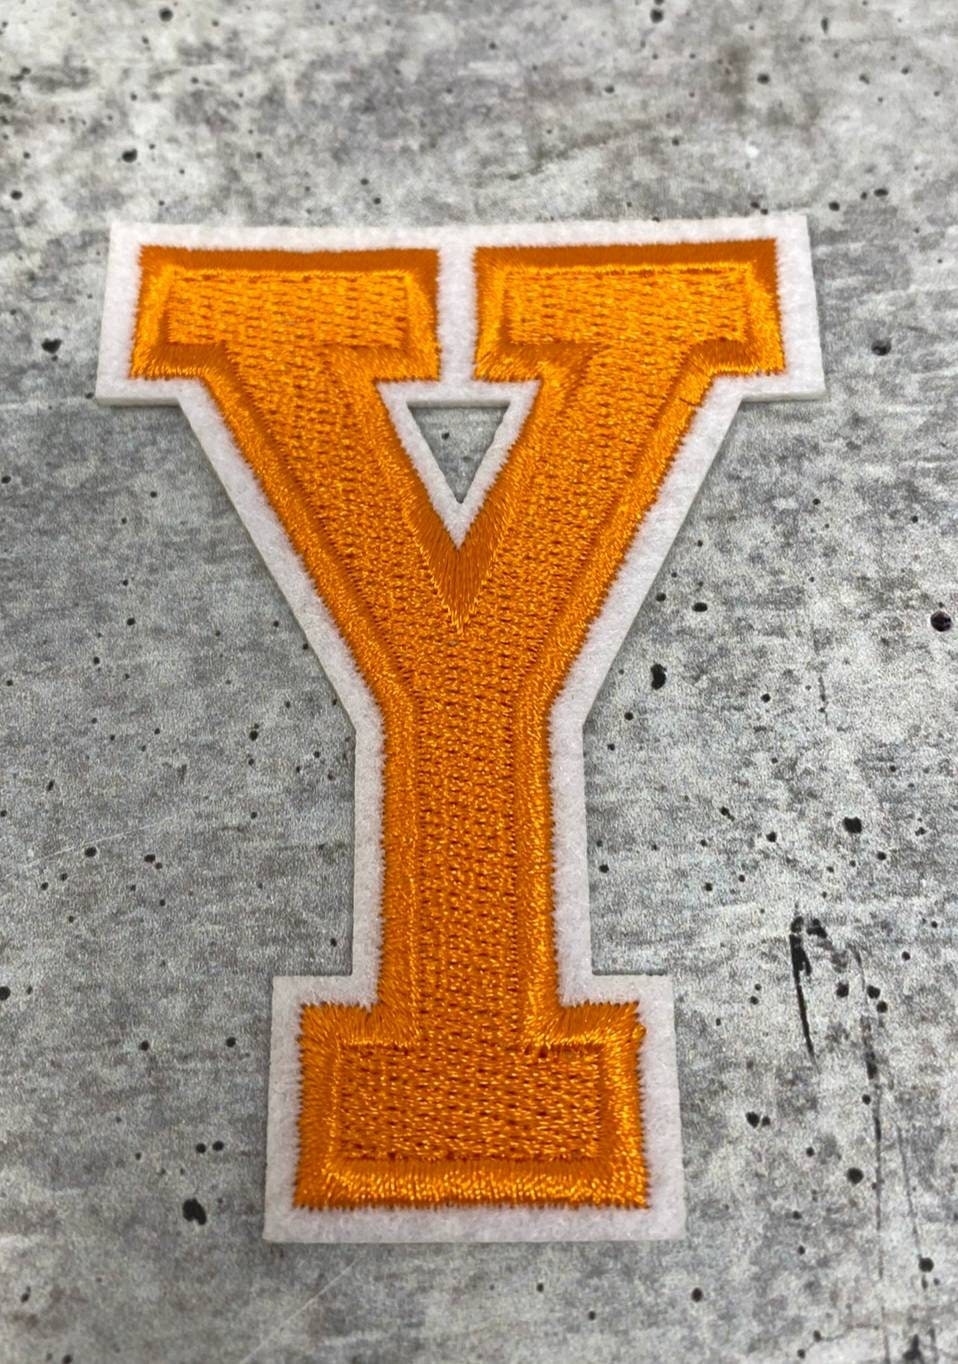 New, ORANGE 3 Embroidered Letter w/White Felt,Varsity Letter Patch,  1-pc, Iron-on Backing, Choose Your Letter, A-Z Letters, DIY Letters